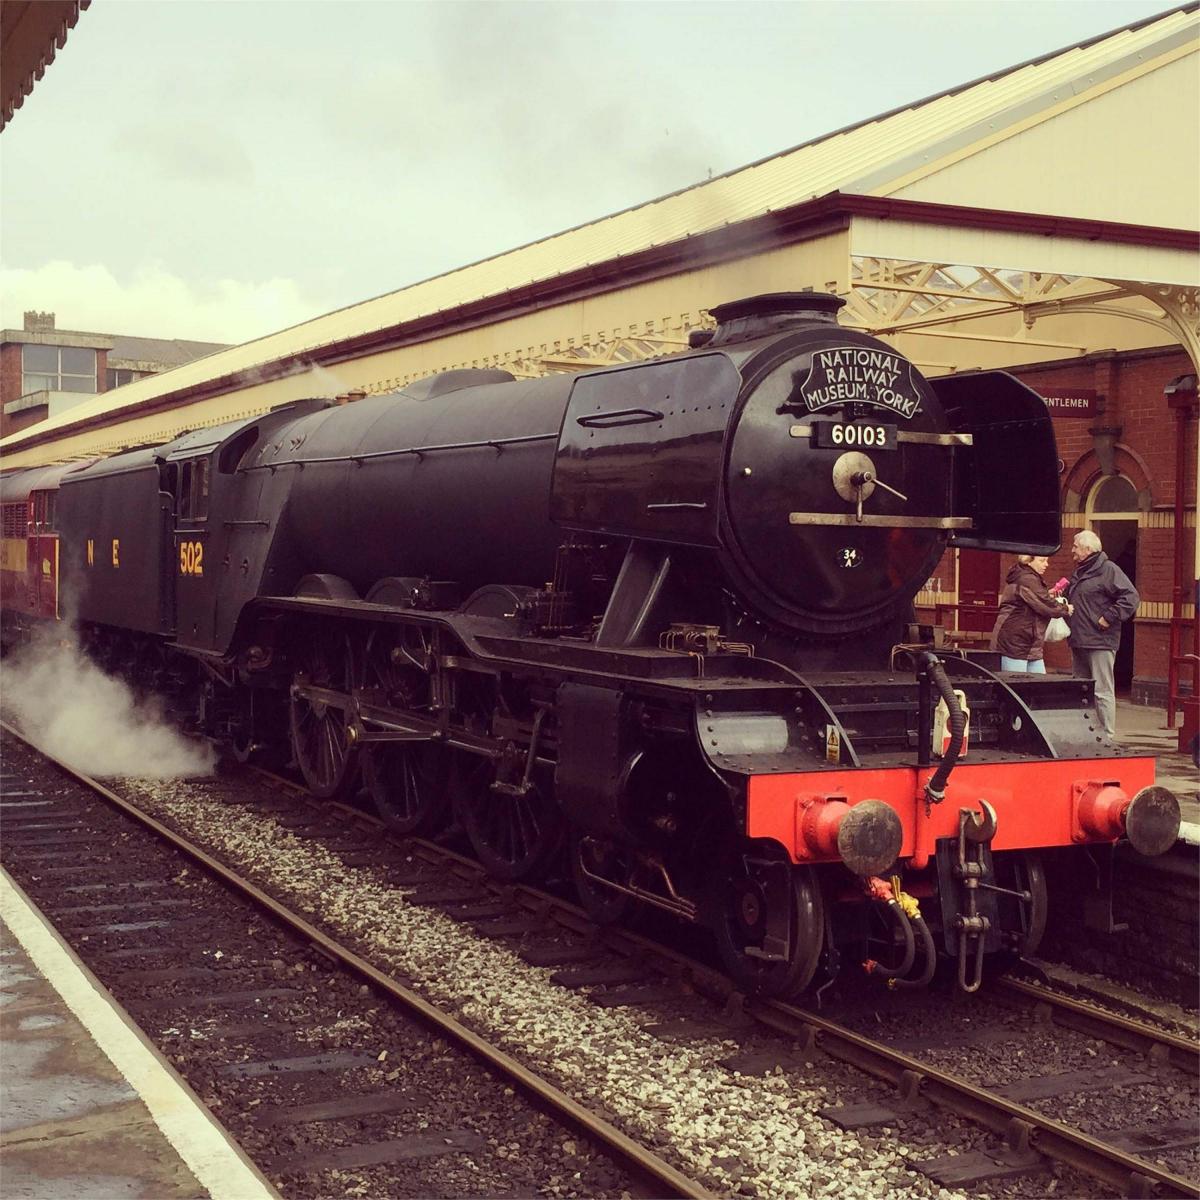 Flying Scotsman returns. Picture courtesy of East Lancashire Railway